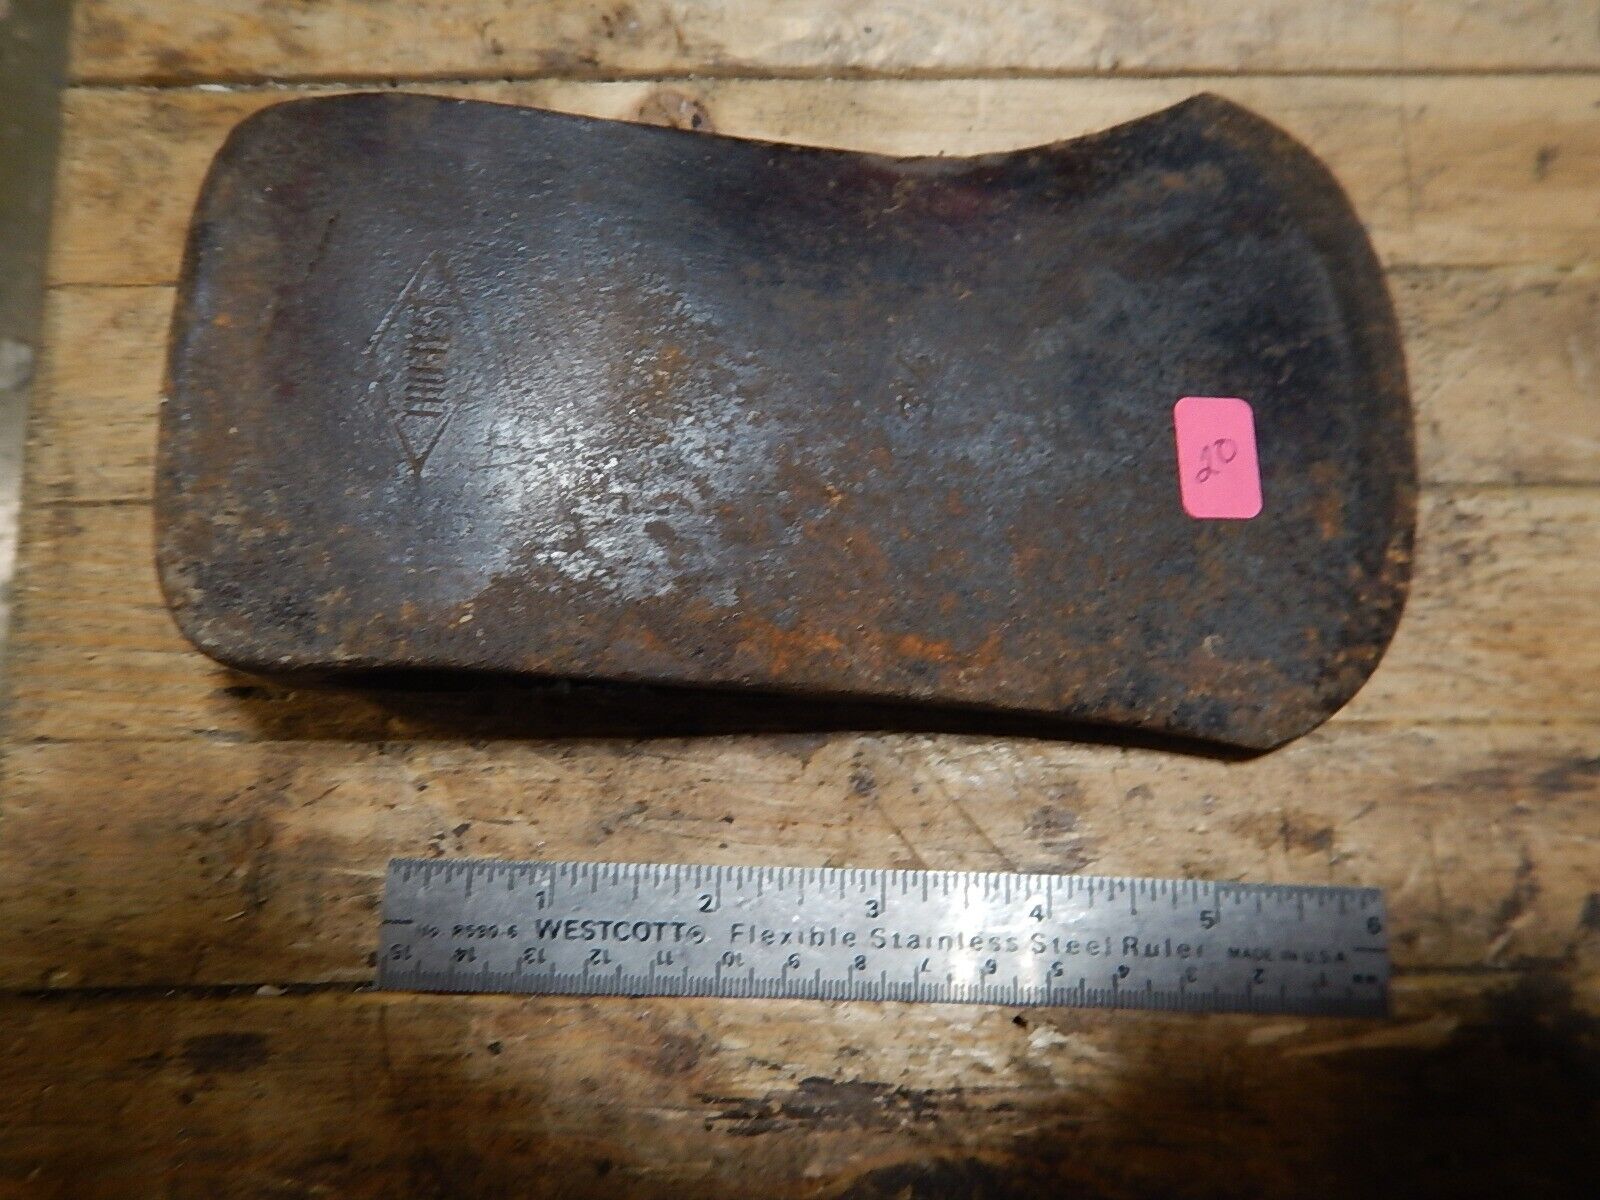 Vintage True-Test axe Head - Item Number A20